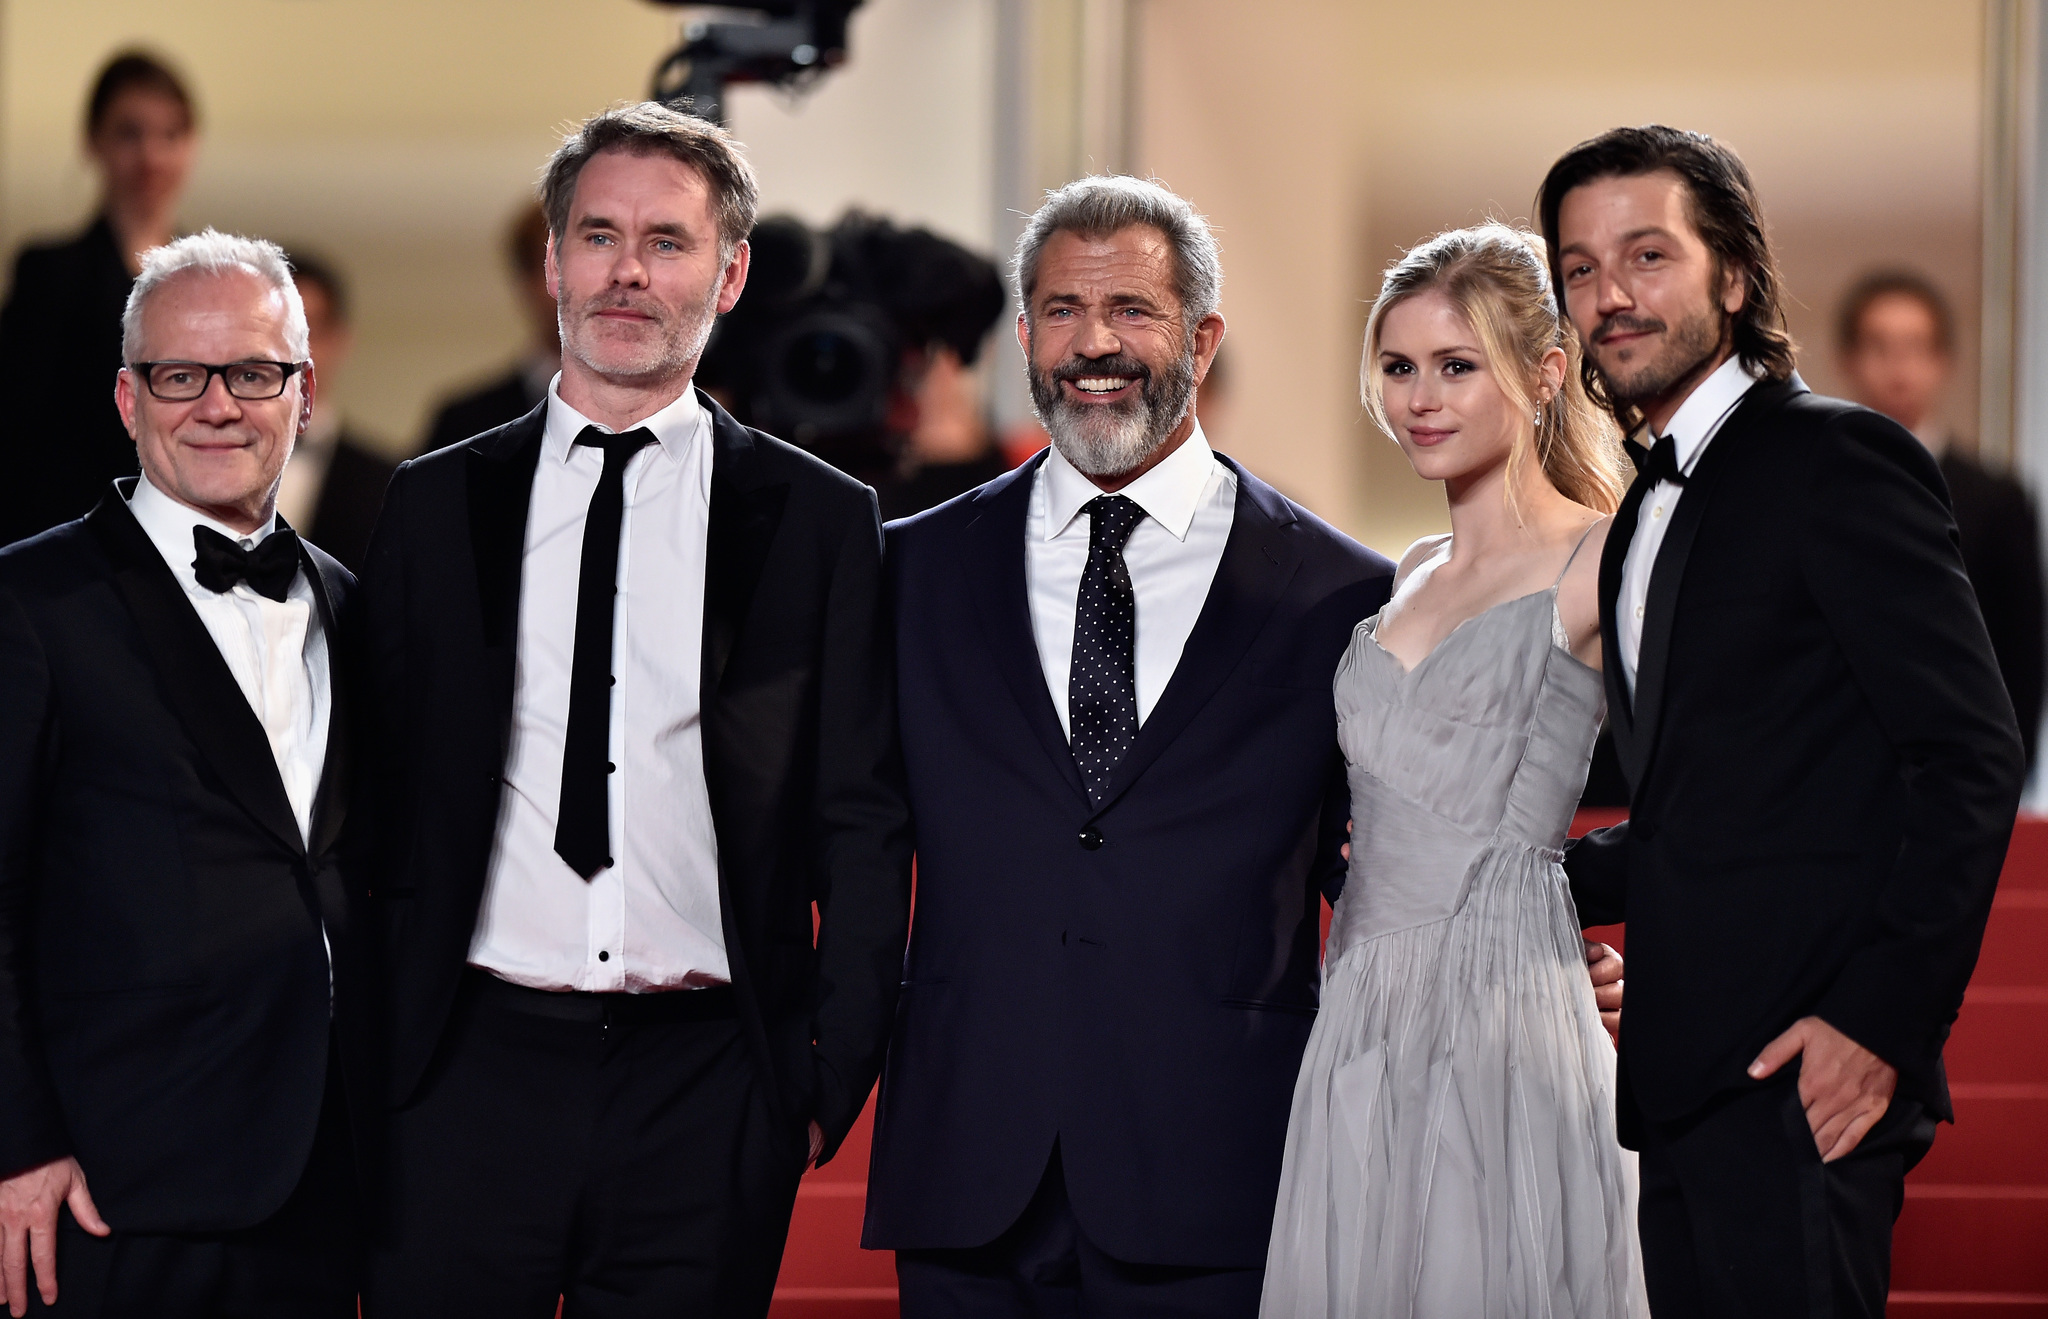 Mel Gibson, Diego Luna, Jean-François Richet, Thierry Frémaux, and Erin Moriarty at an event for Blood Father (2016)